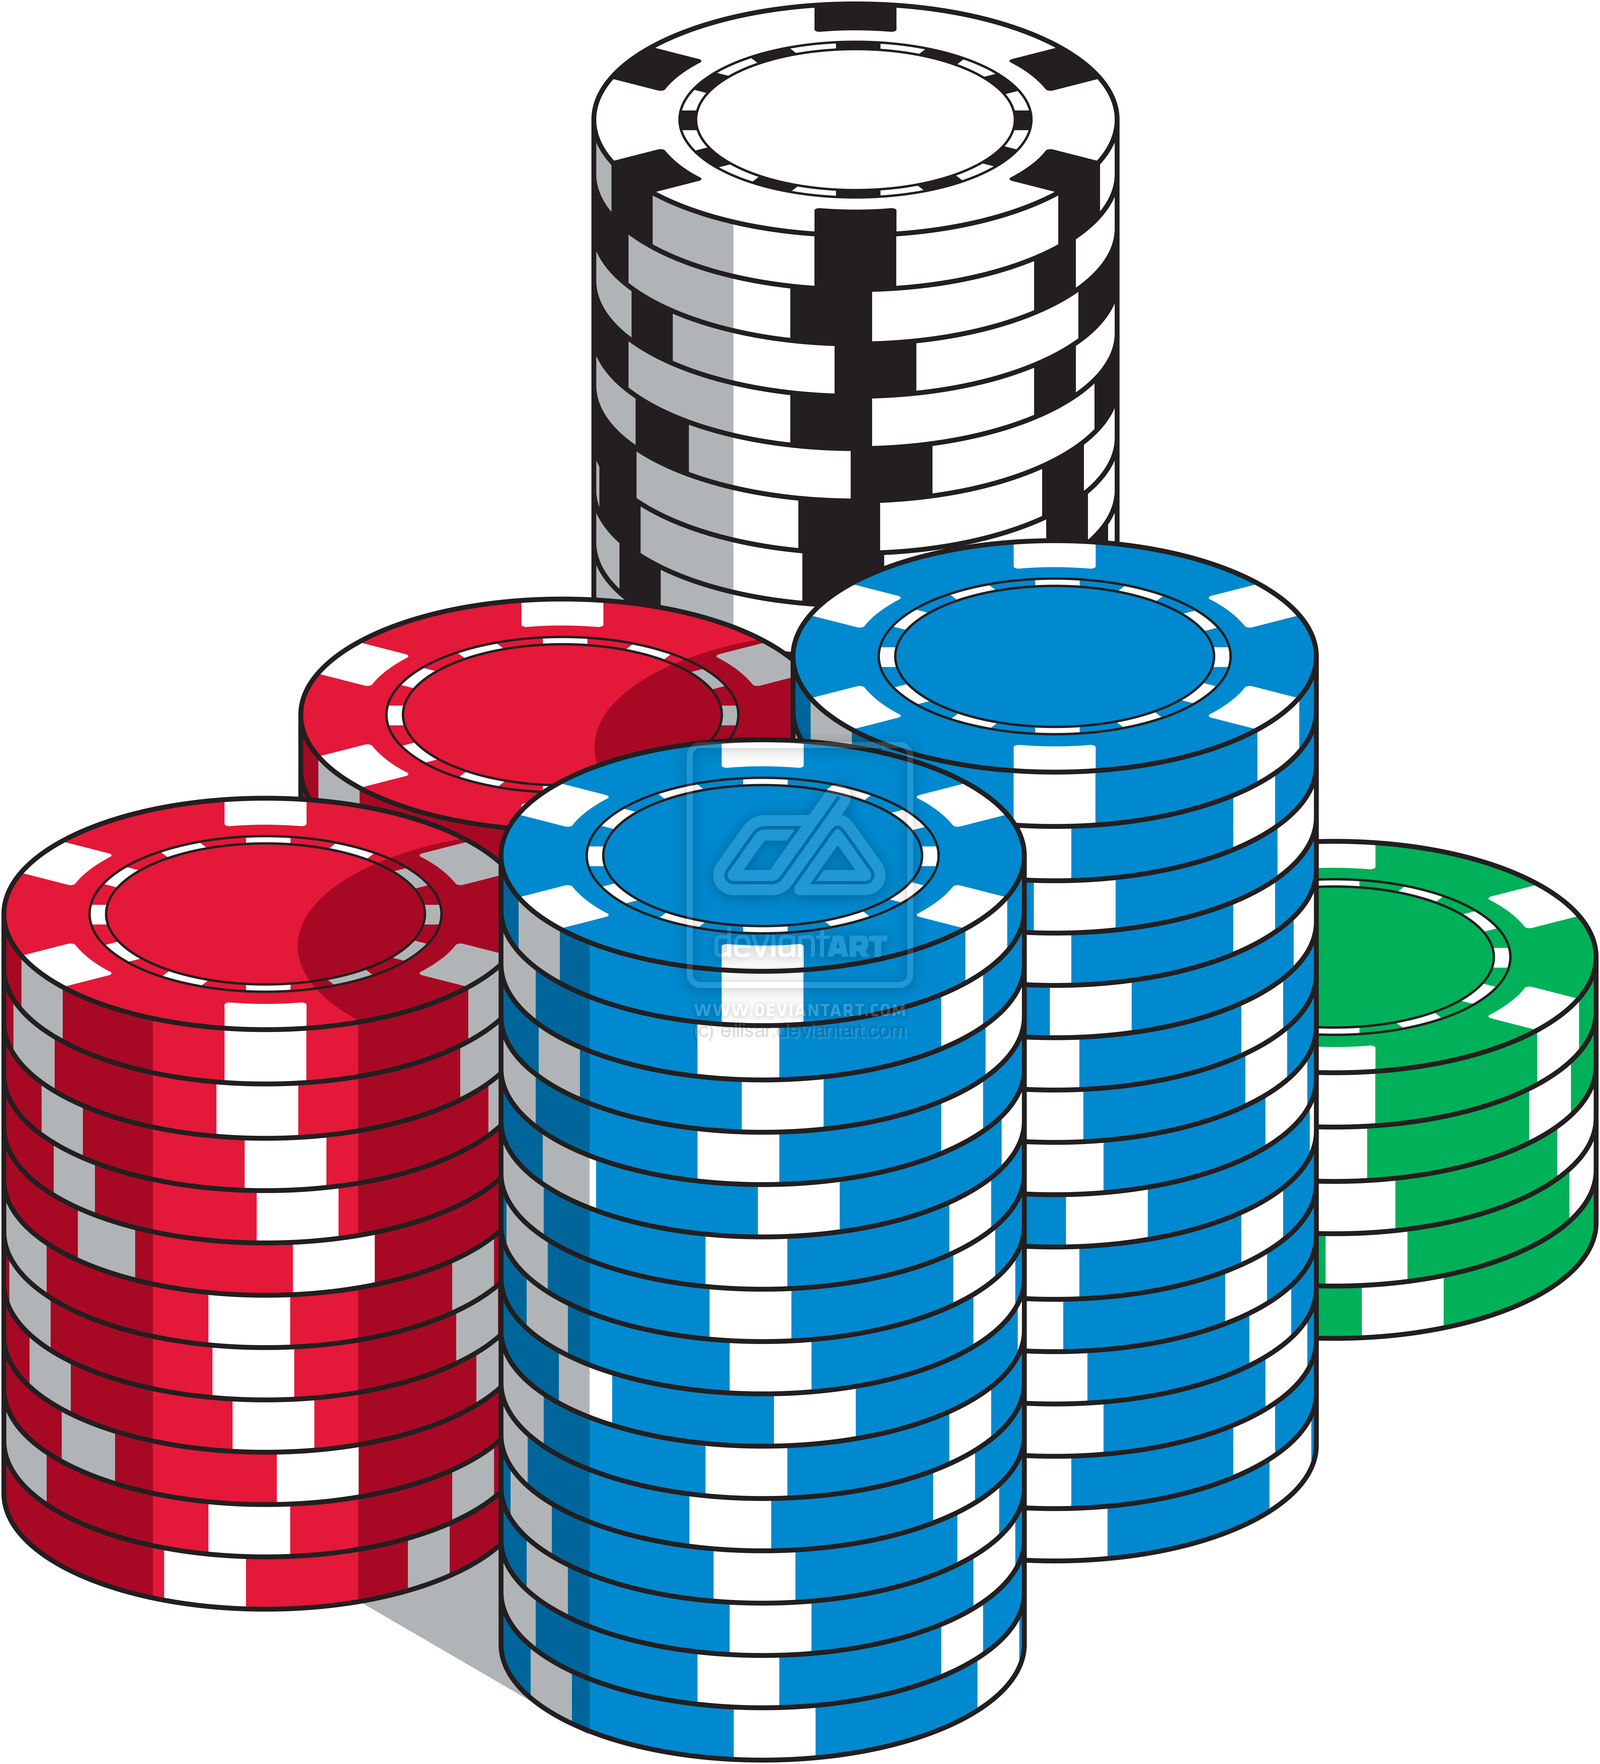 Poker Chips Clipart   Clipart Panda   Free Clipart Images